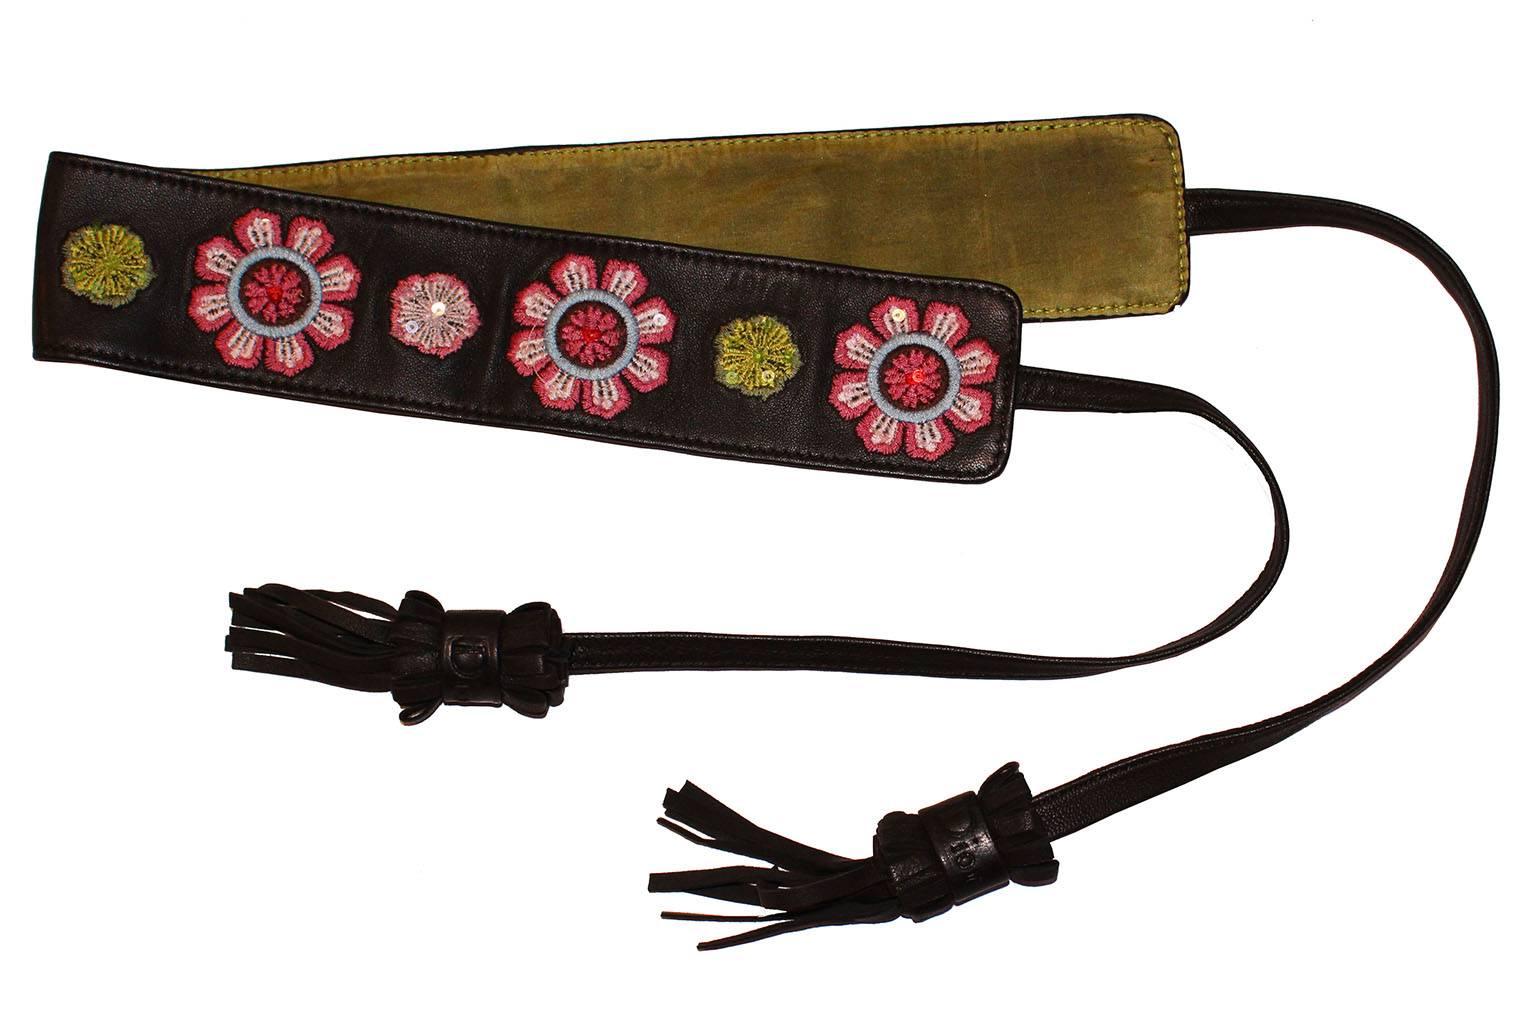 This is a great belt by Dior.The main part of the belt is brown leather, with large and small flowers embroidered onto the belt,with a few sequins added to the flowers.There is a leather tie at each end , and a tassle stamped Dior at the end of each